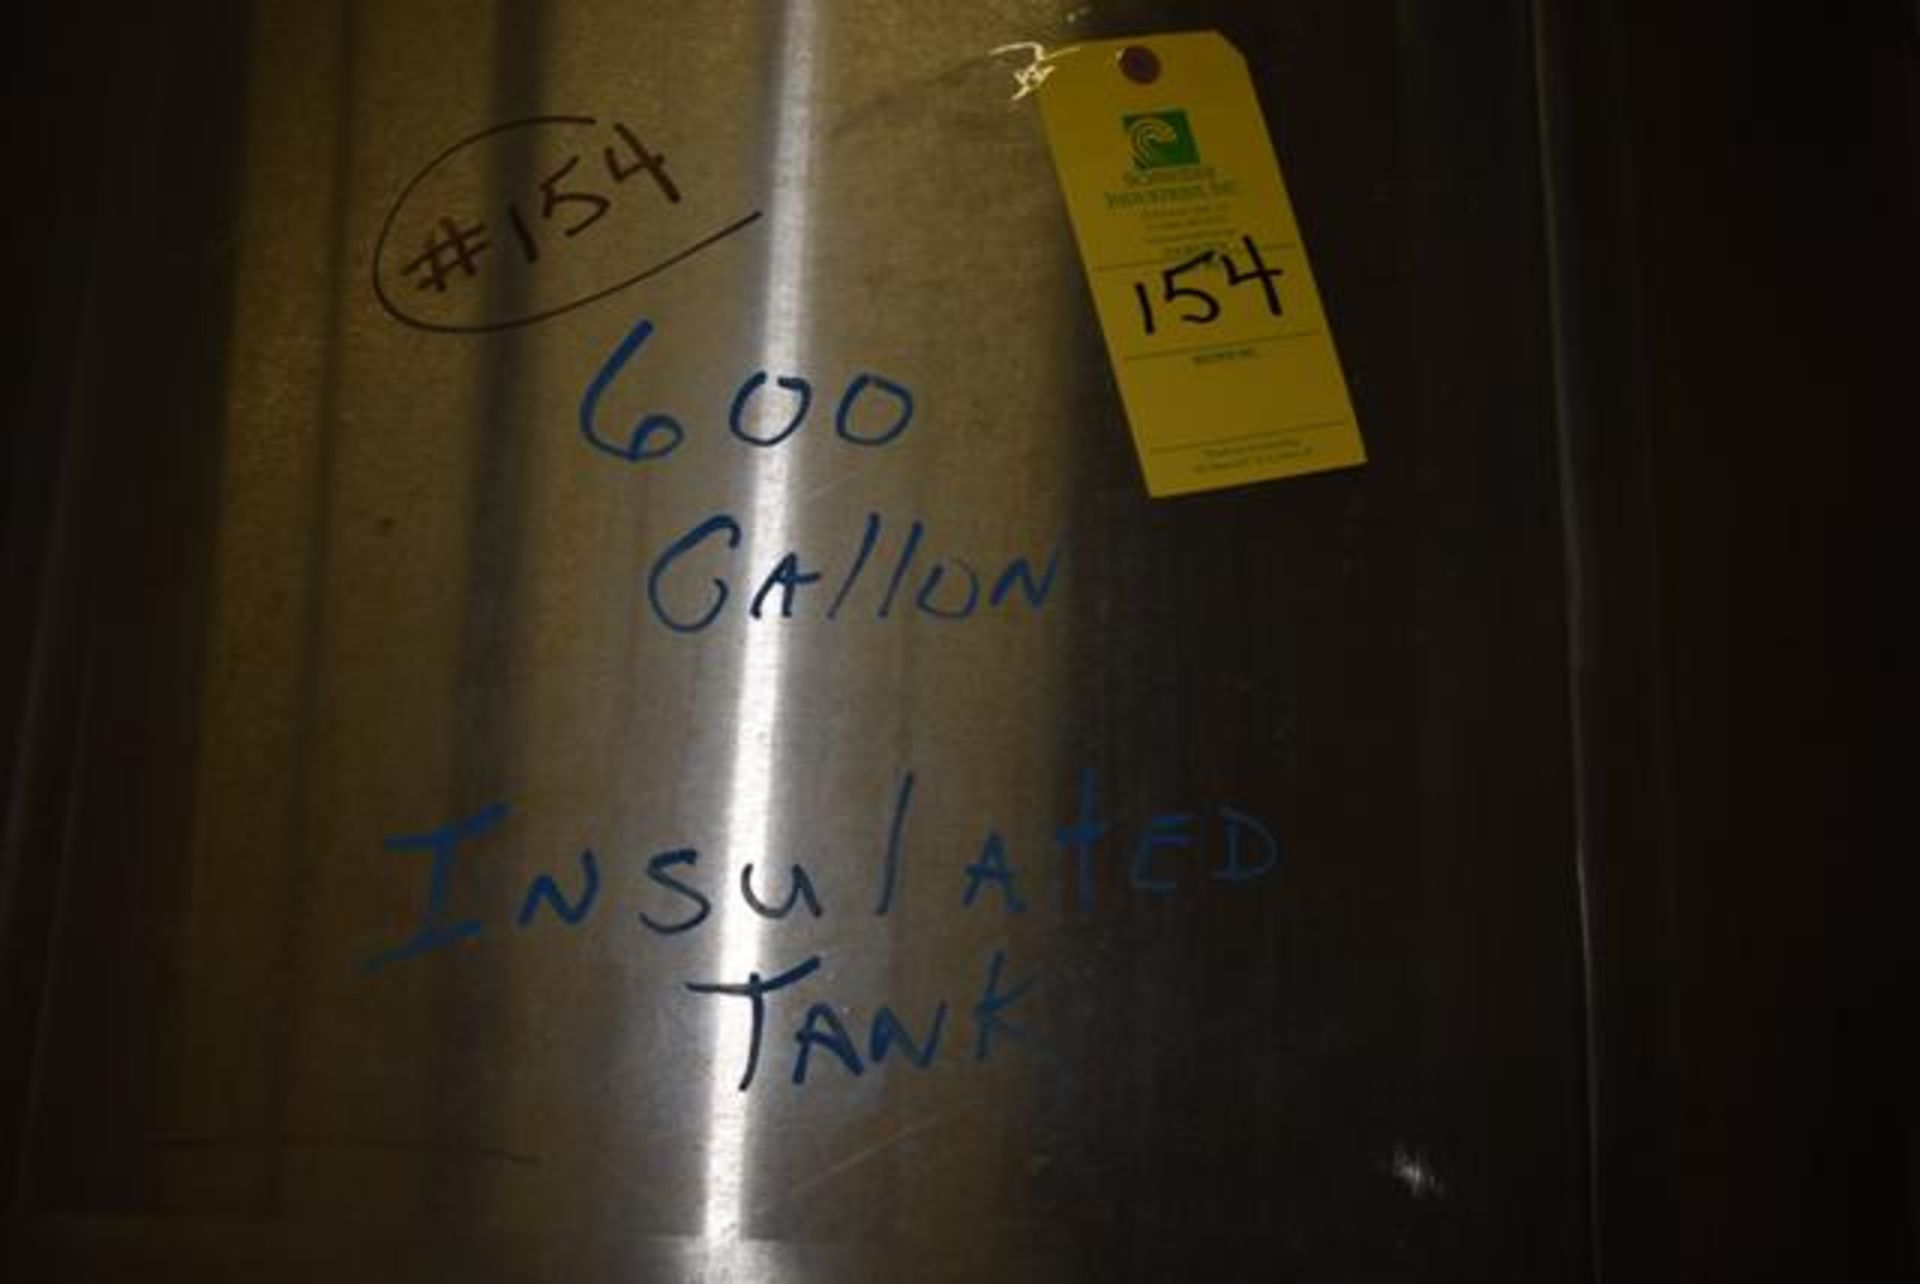 Stainless Steel Insulated Tank, Rated 600 Gal., 56" x 60" - Image 2 of 6